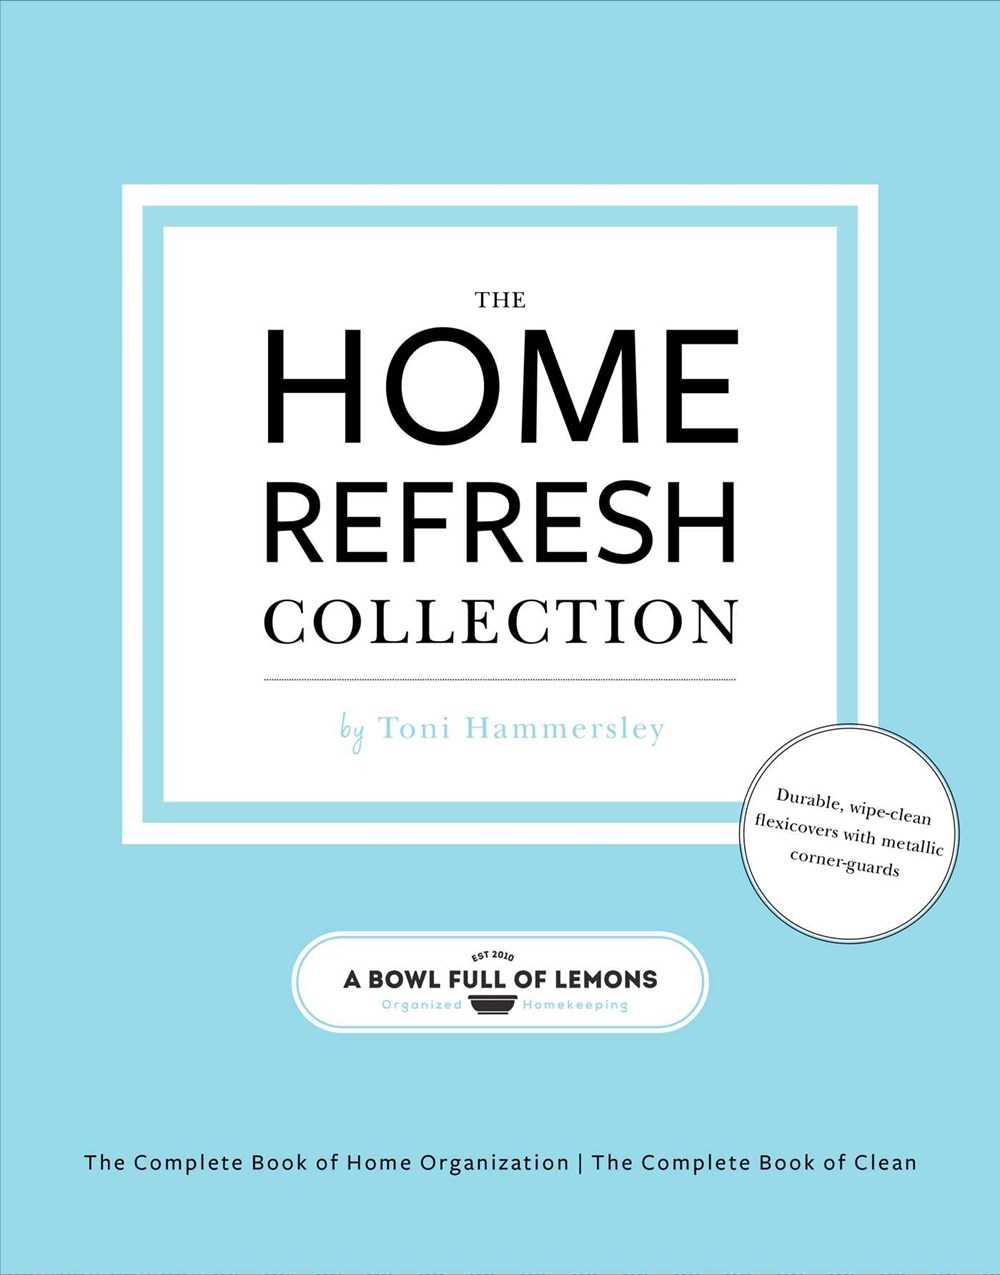 The Home Refresh Collection